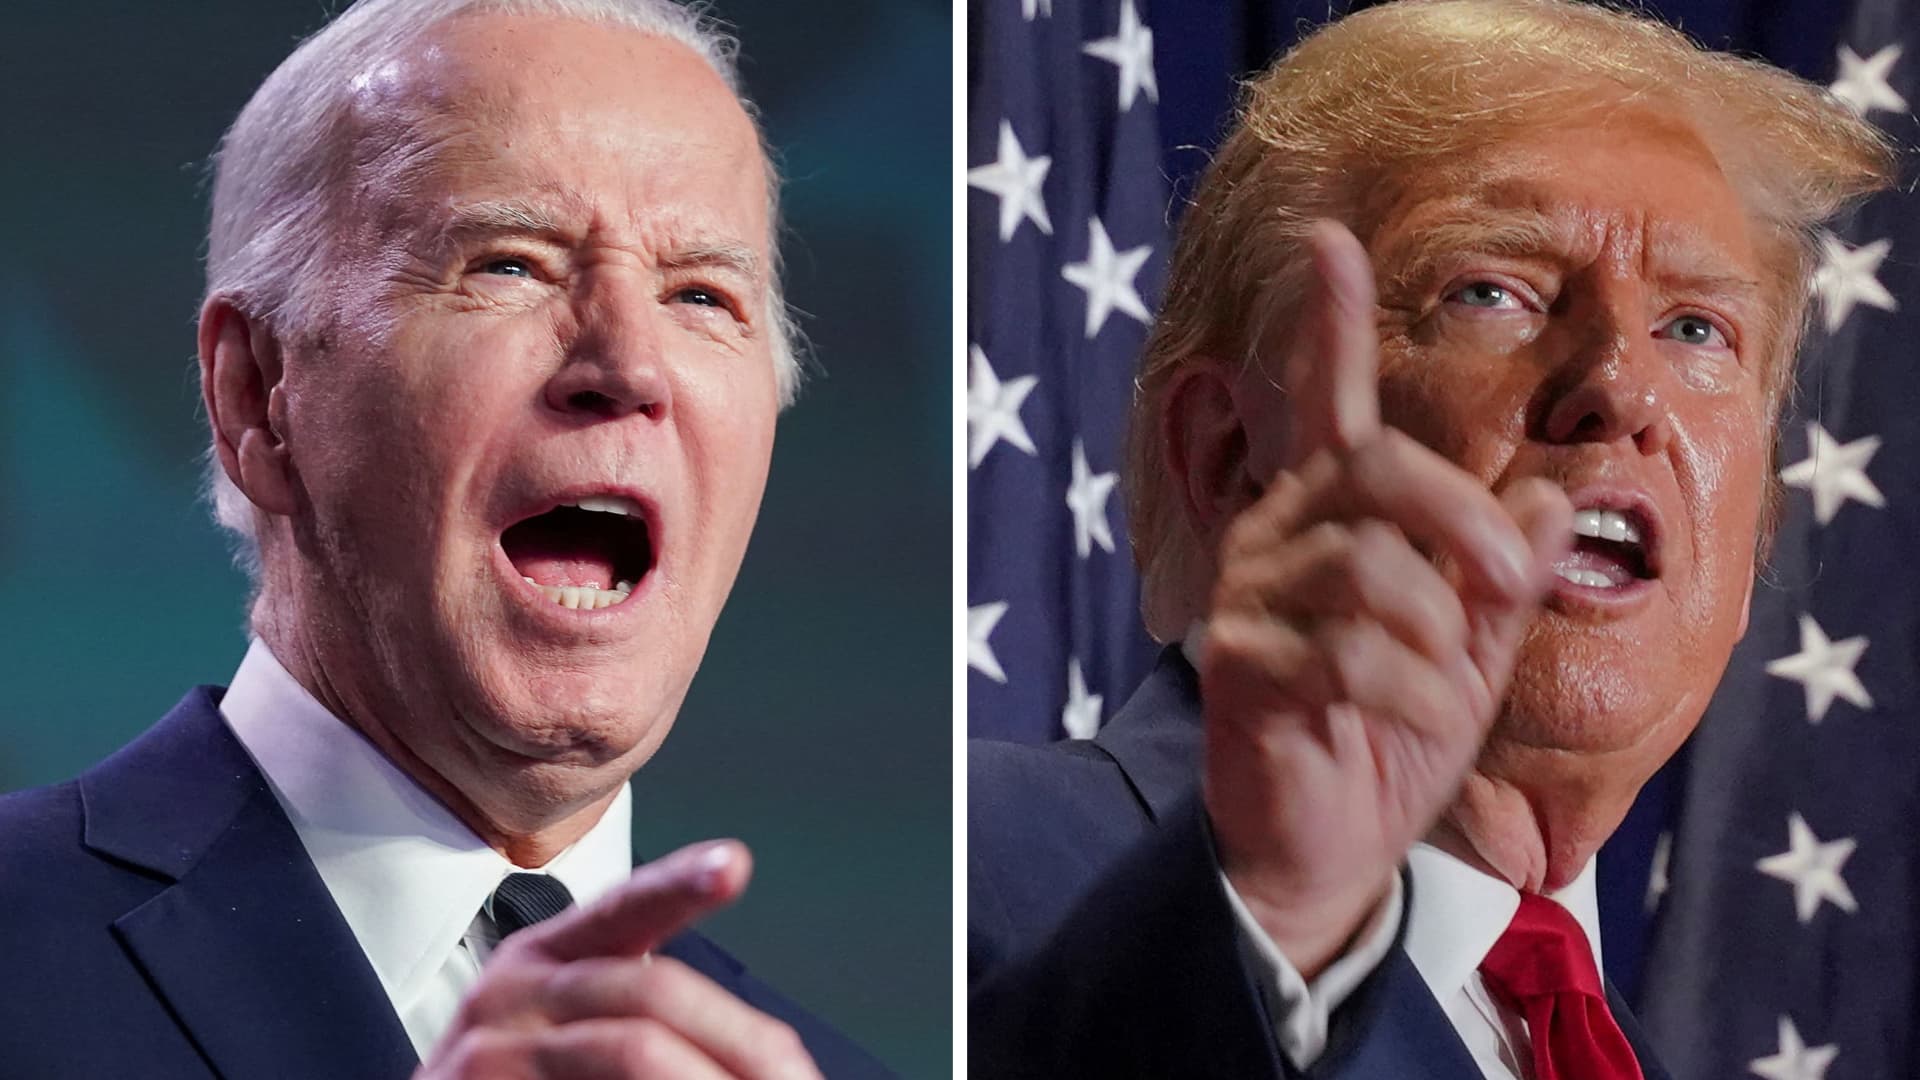 Trump slams Biden for inflation after hotter-than-expected CPI report [Video]